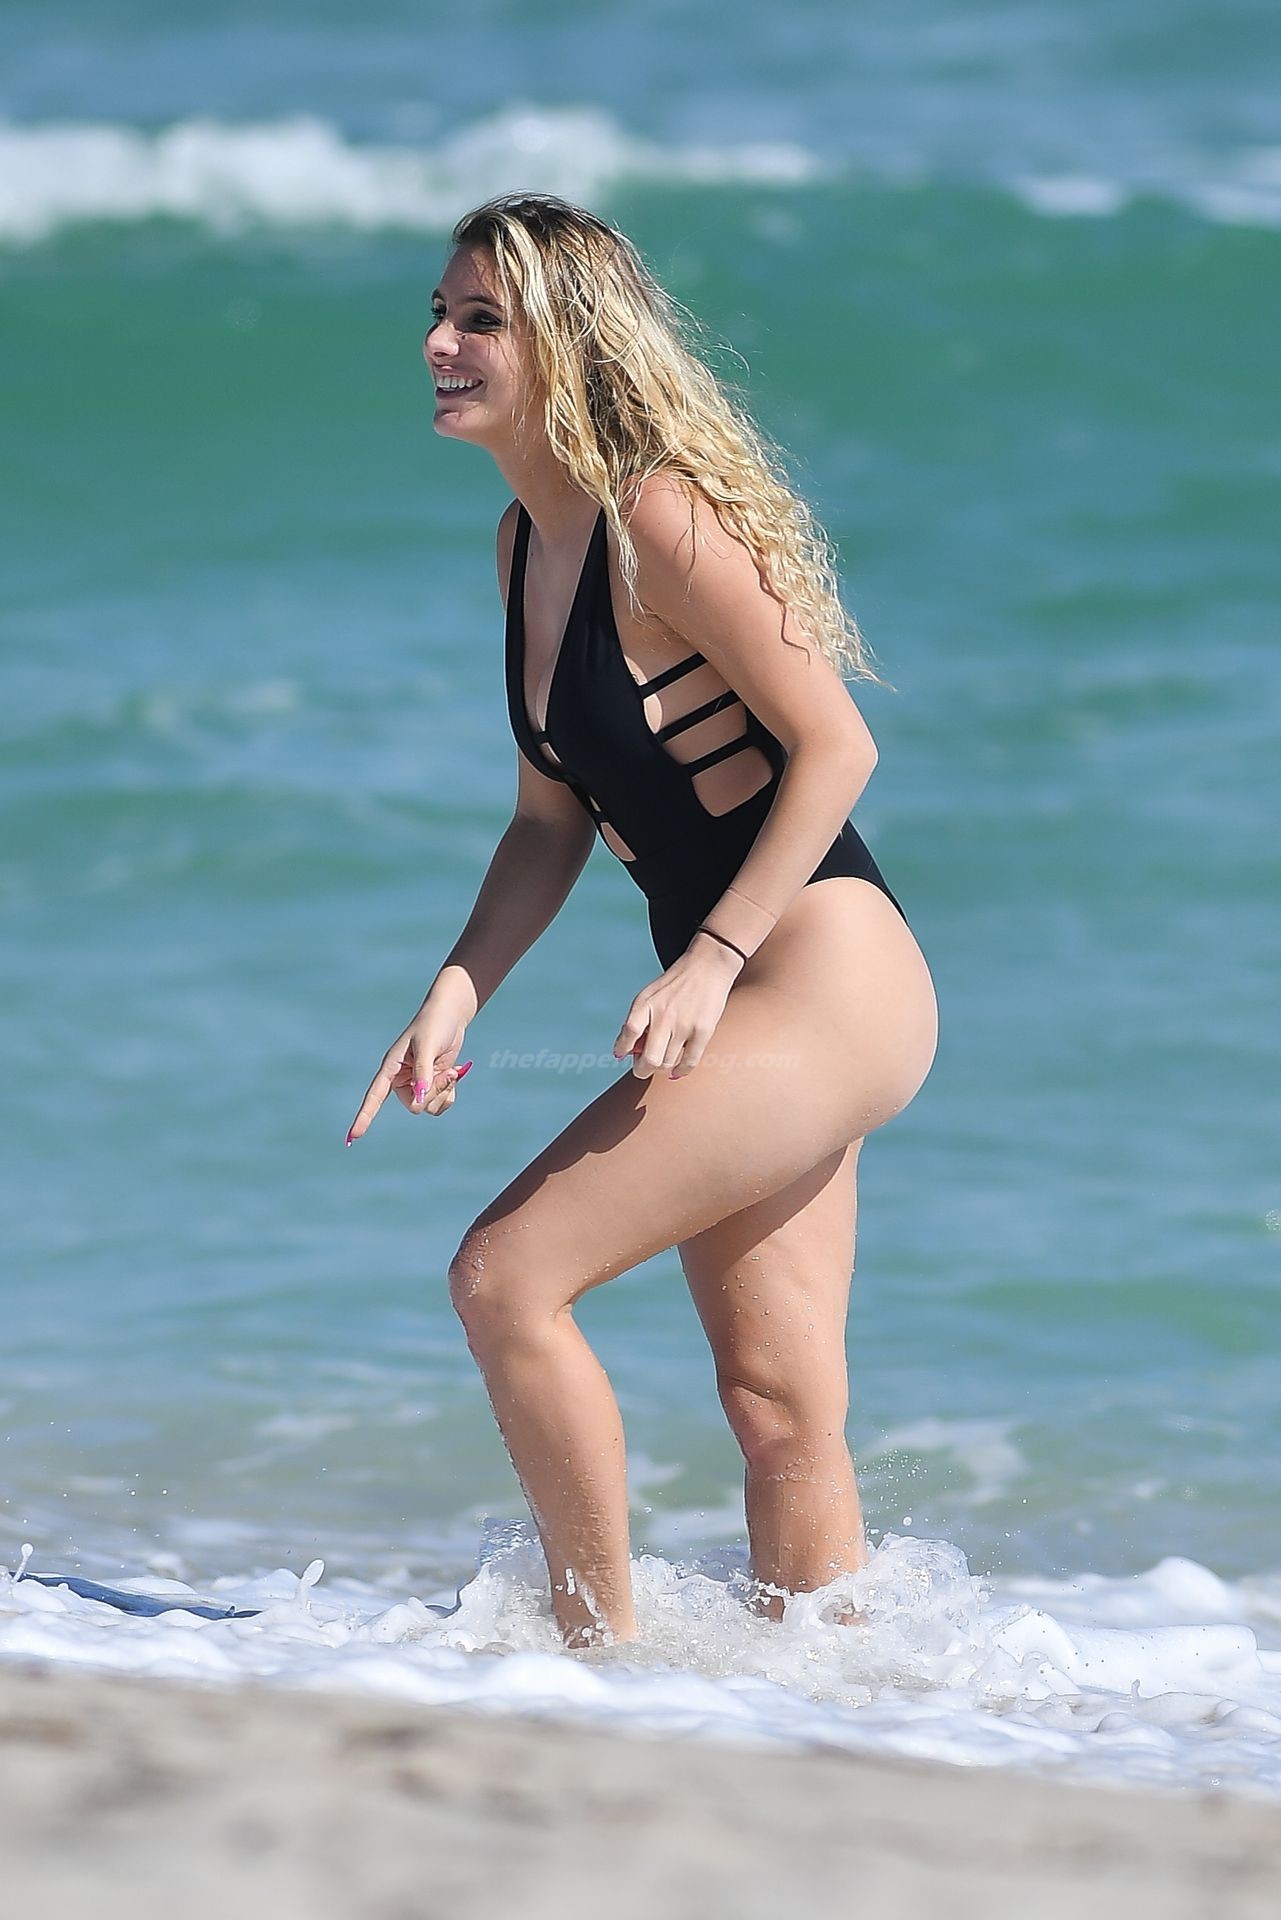 Lele Pons Shows Off Her Butt in a Black Swimsuit in Miami Beach (45 Photos)